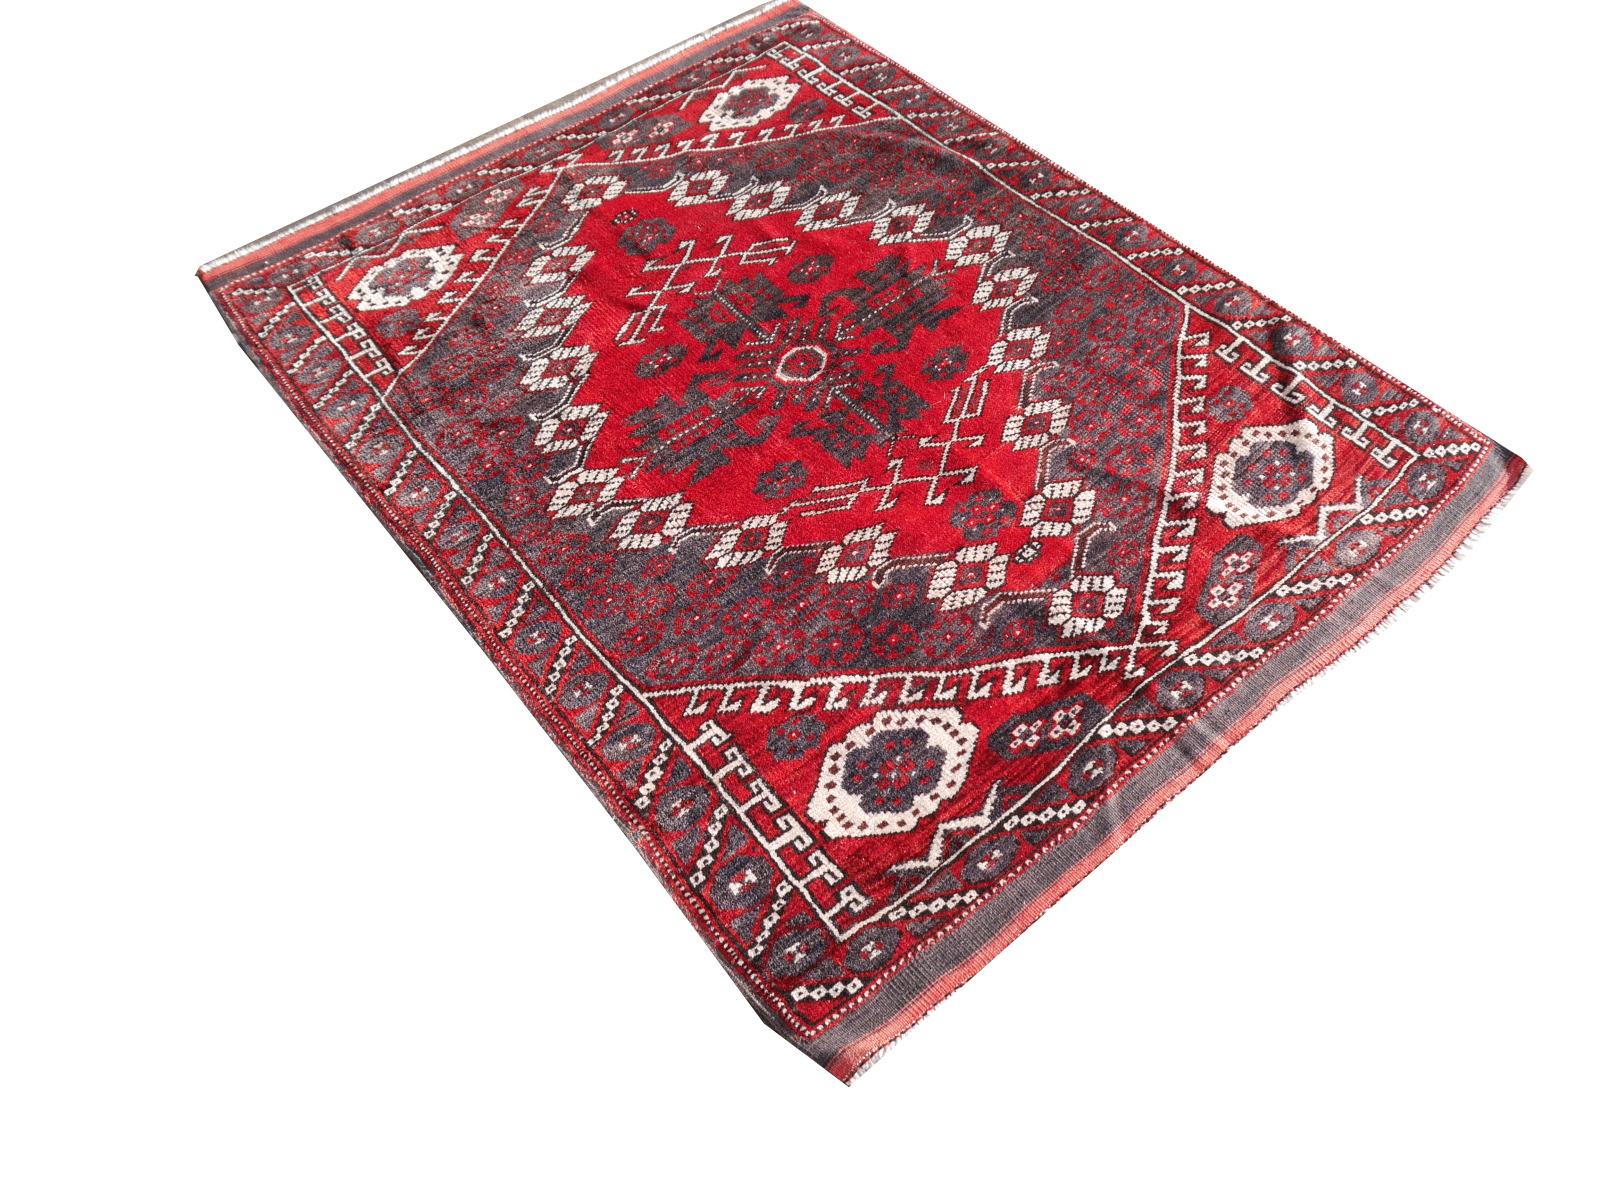 This is an example of the rare and hard to find tribal Turkish Bergama Kiz rugs. The color is often referred to as Turkish red. The condition is very good with vibrant colors.

Bergama semi antique carpet red, gray rare 132 x 110 cm